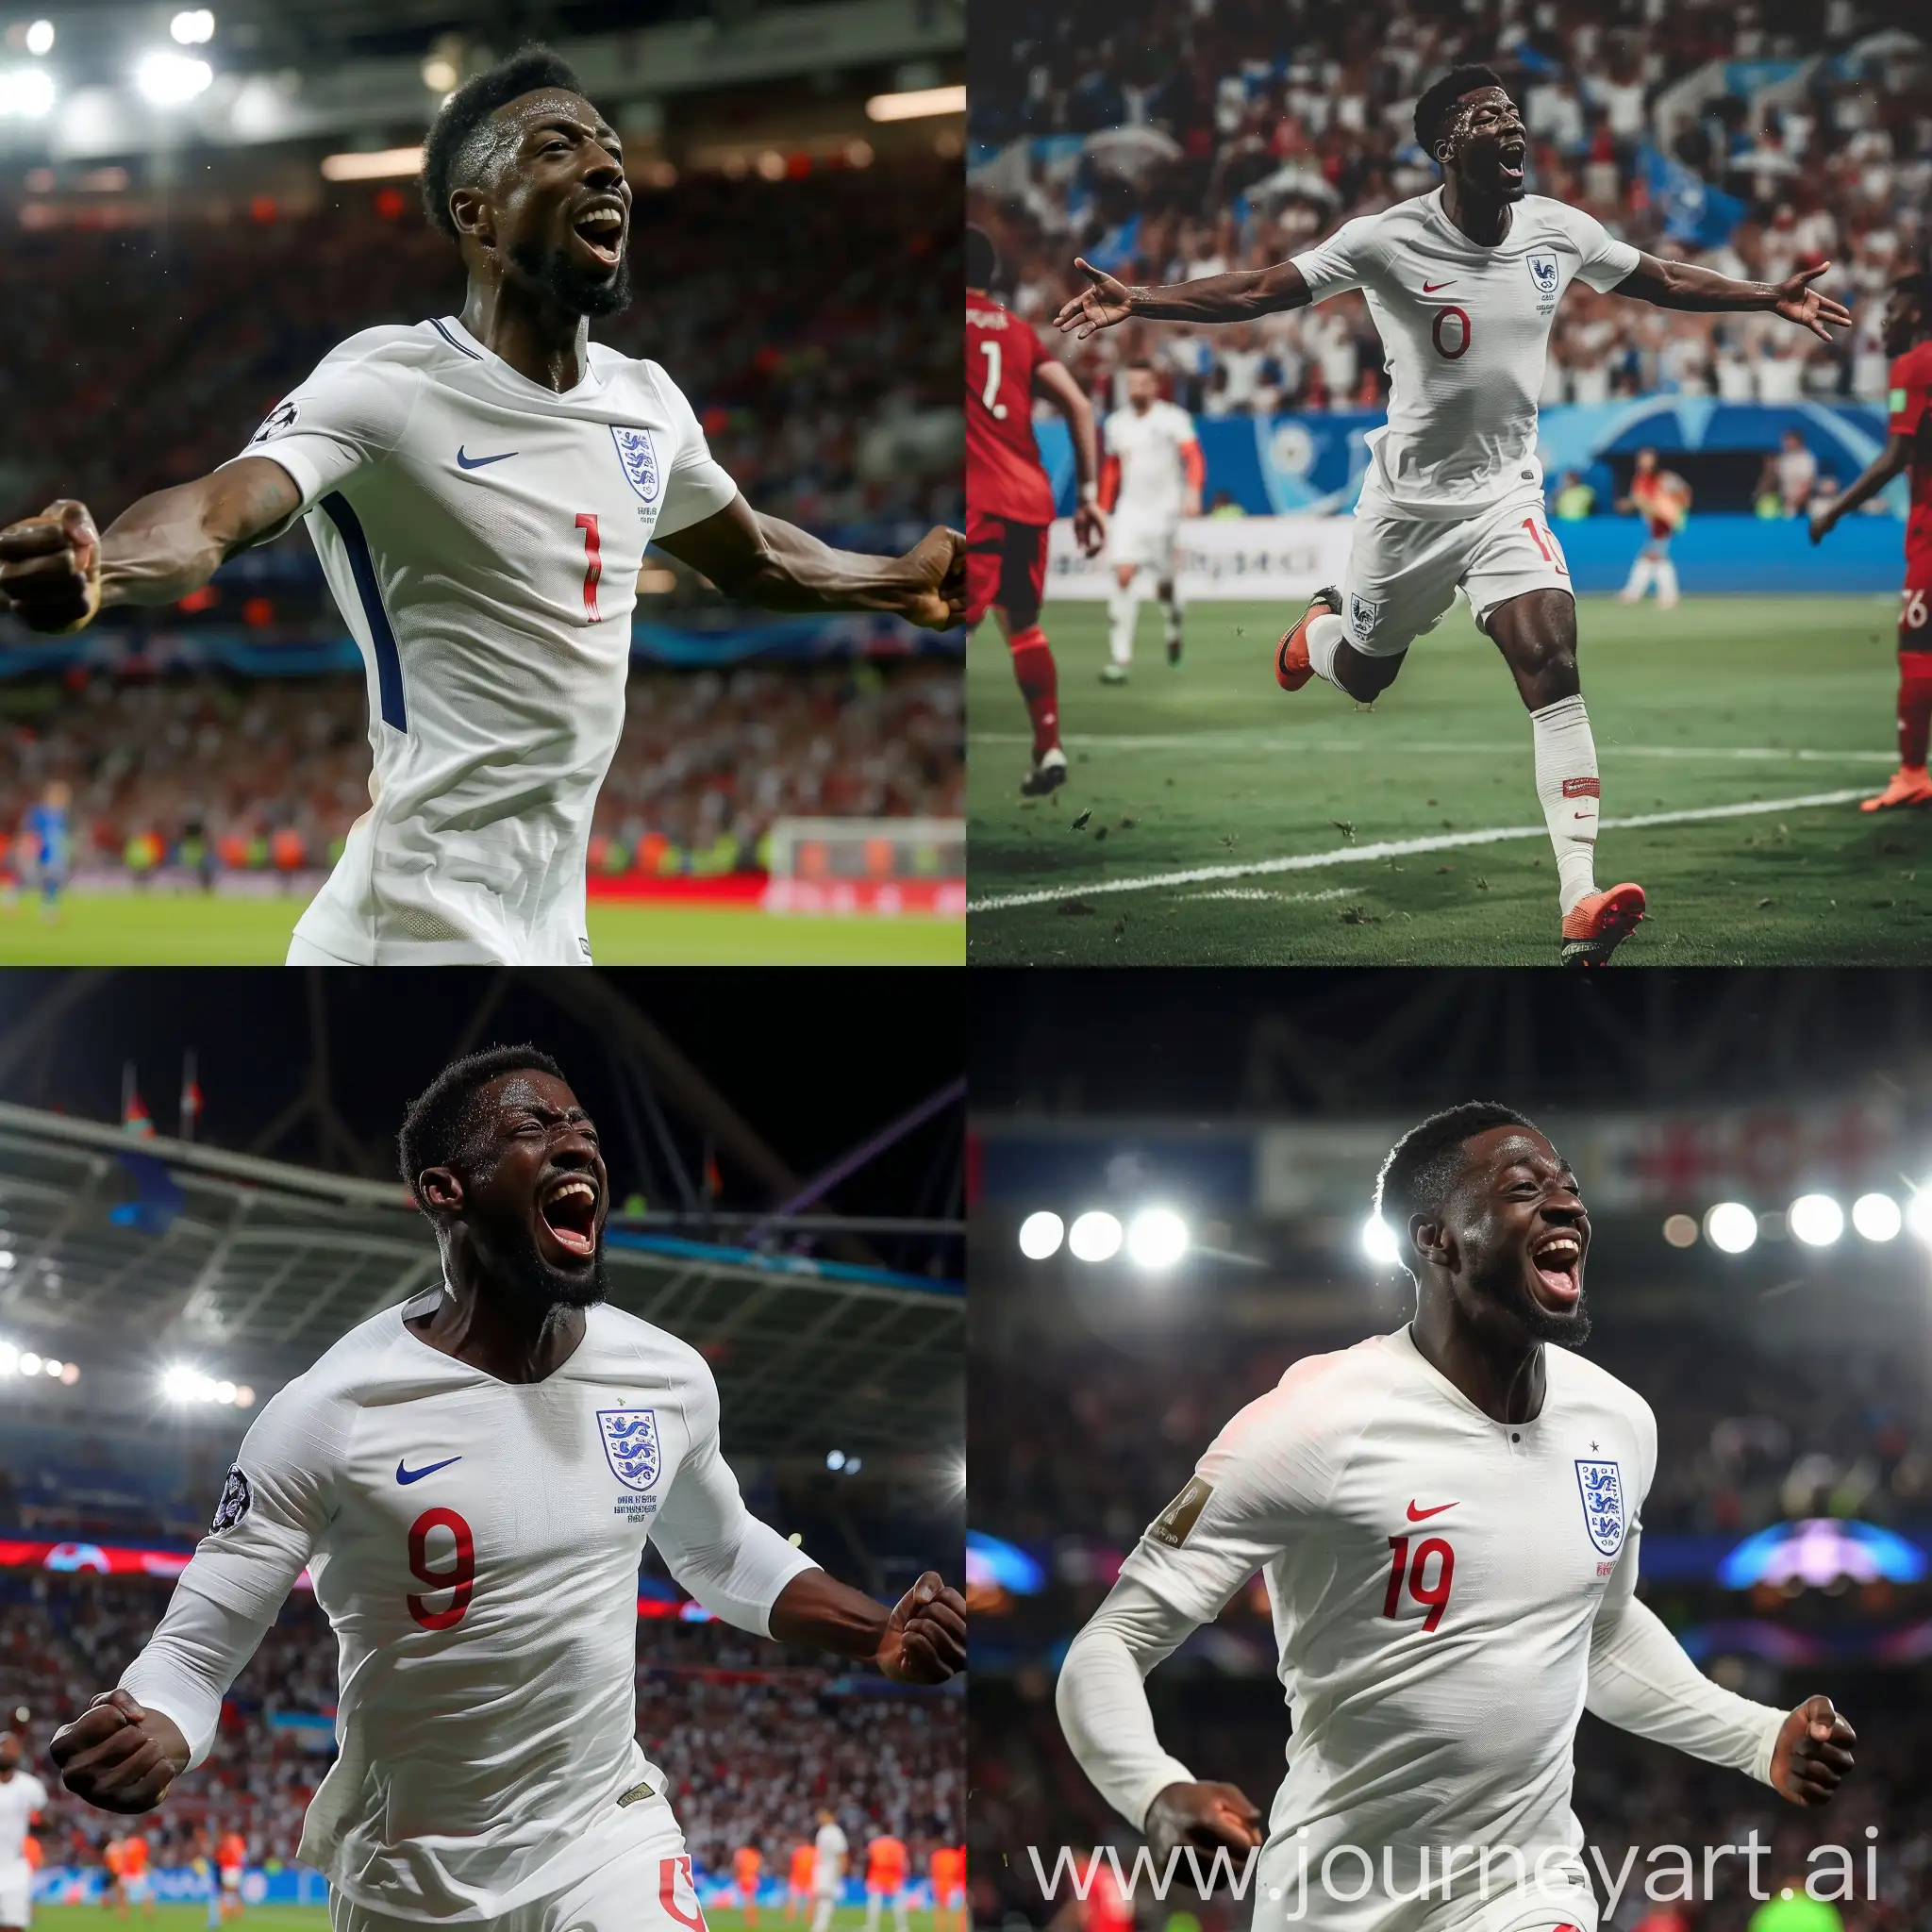 Dembele-Scores-Against-England-in-Football-Match